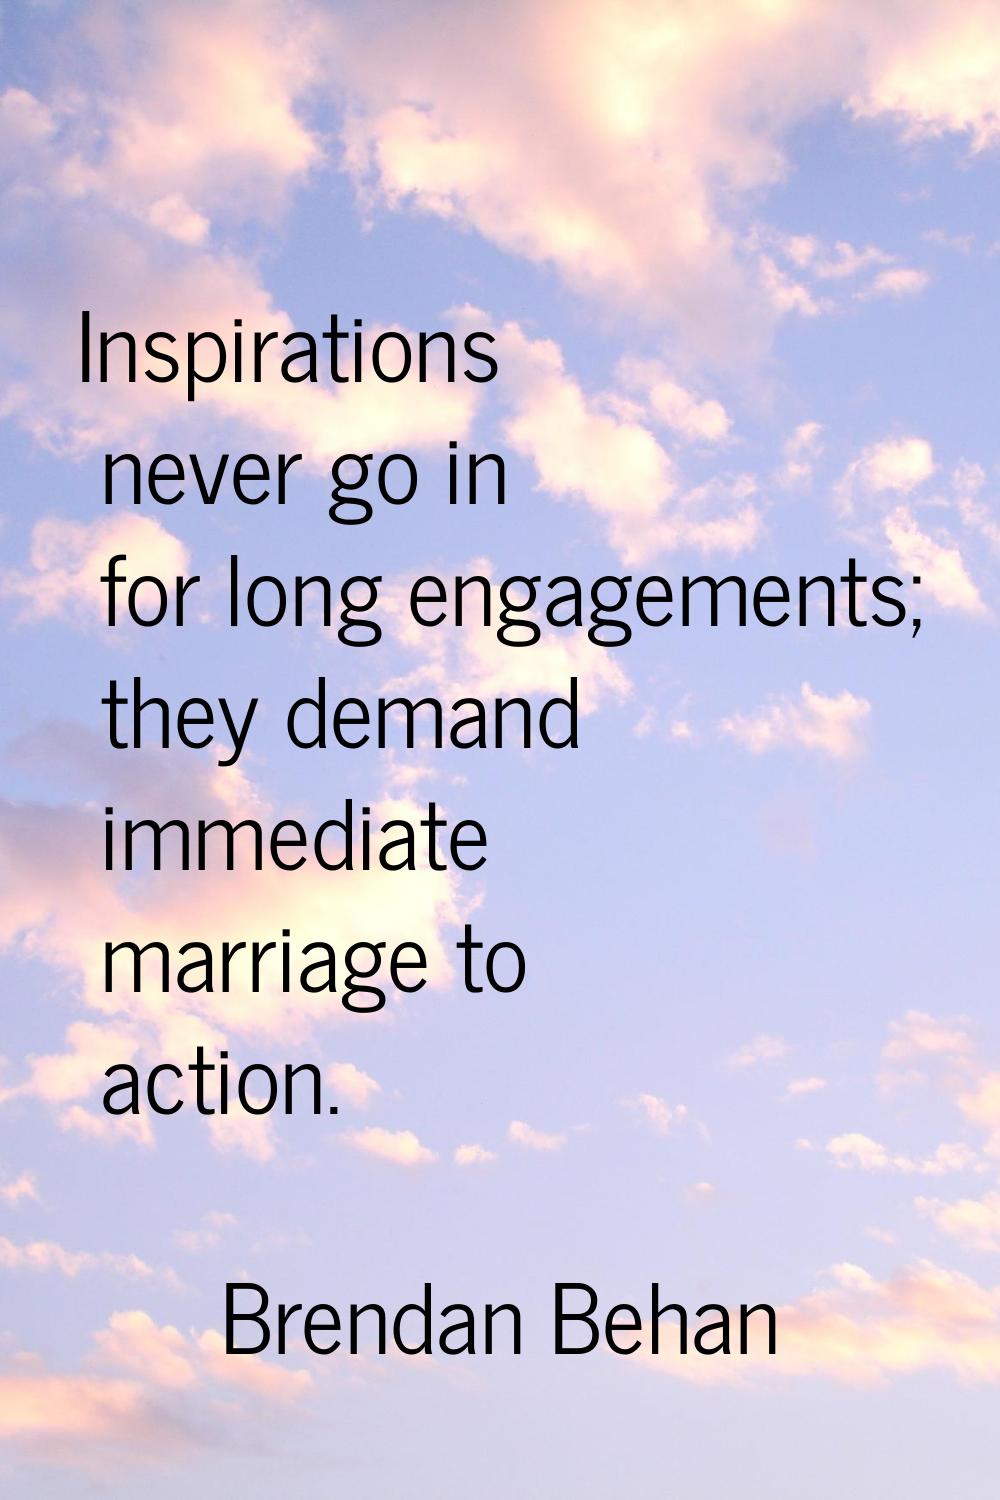 Inspirations never go in for long engagements; they demand immediate marriage to action.